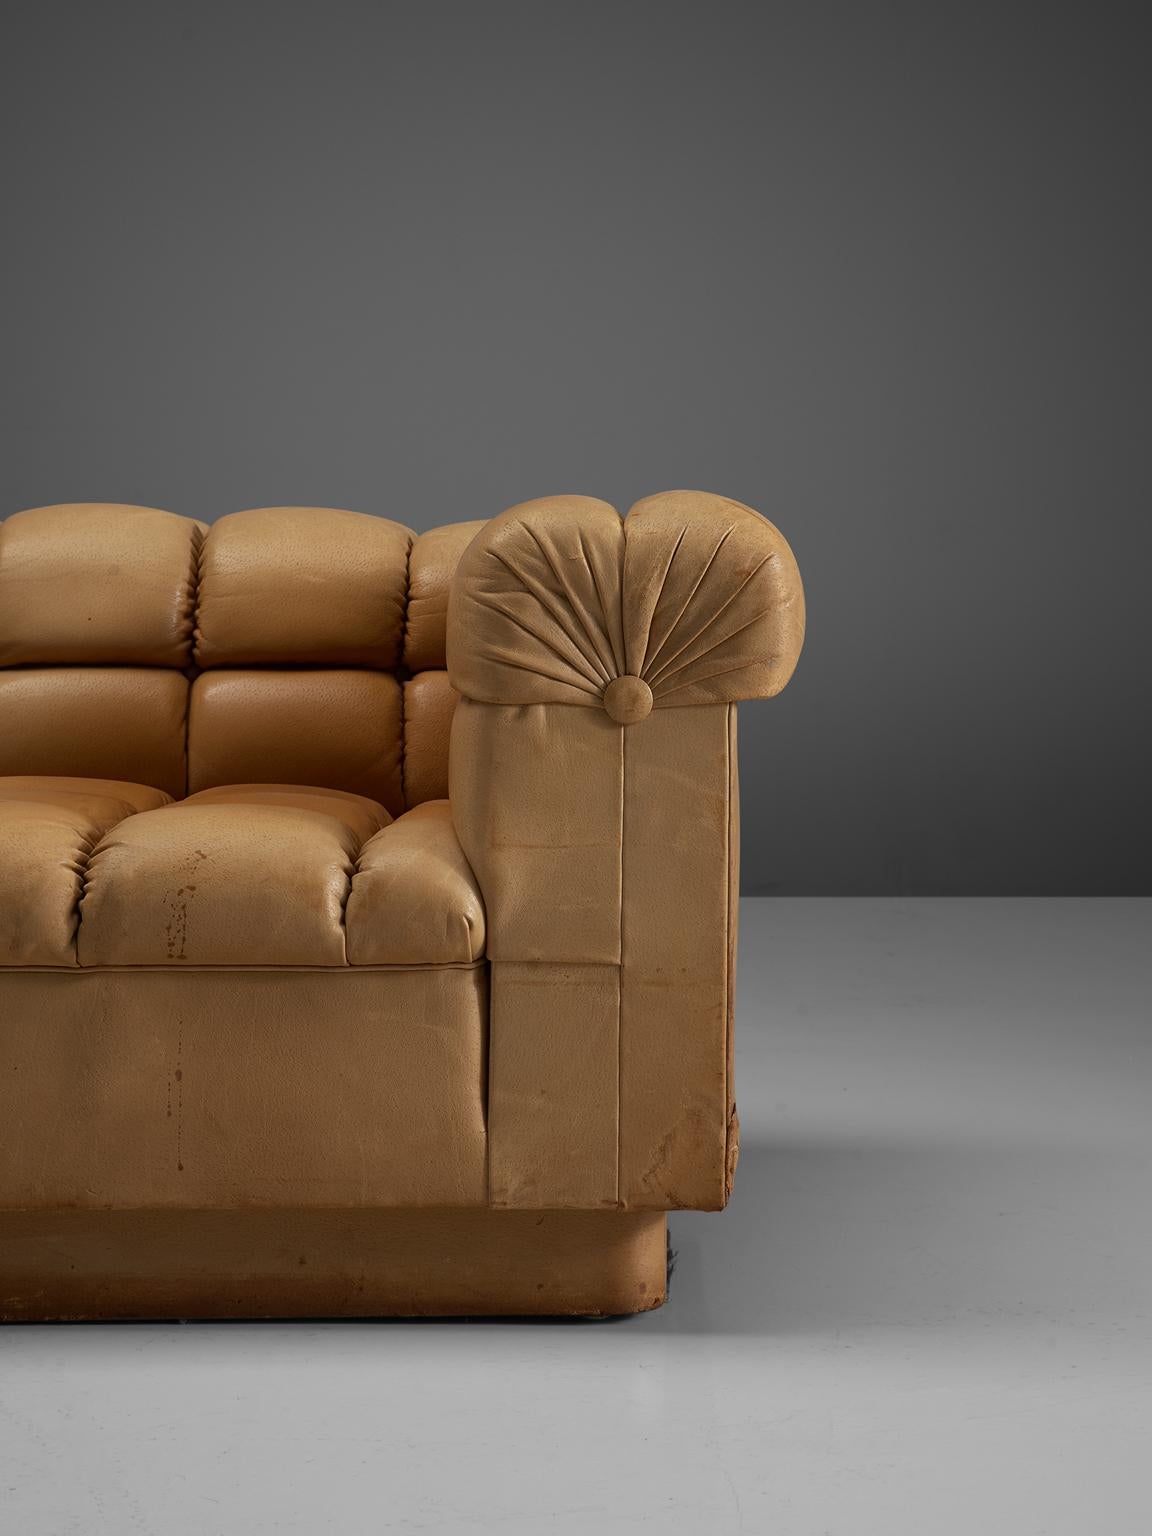 Mid-20th Century Edward Wormley 'Party' Sofa in Cognac Leather